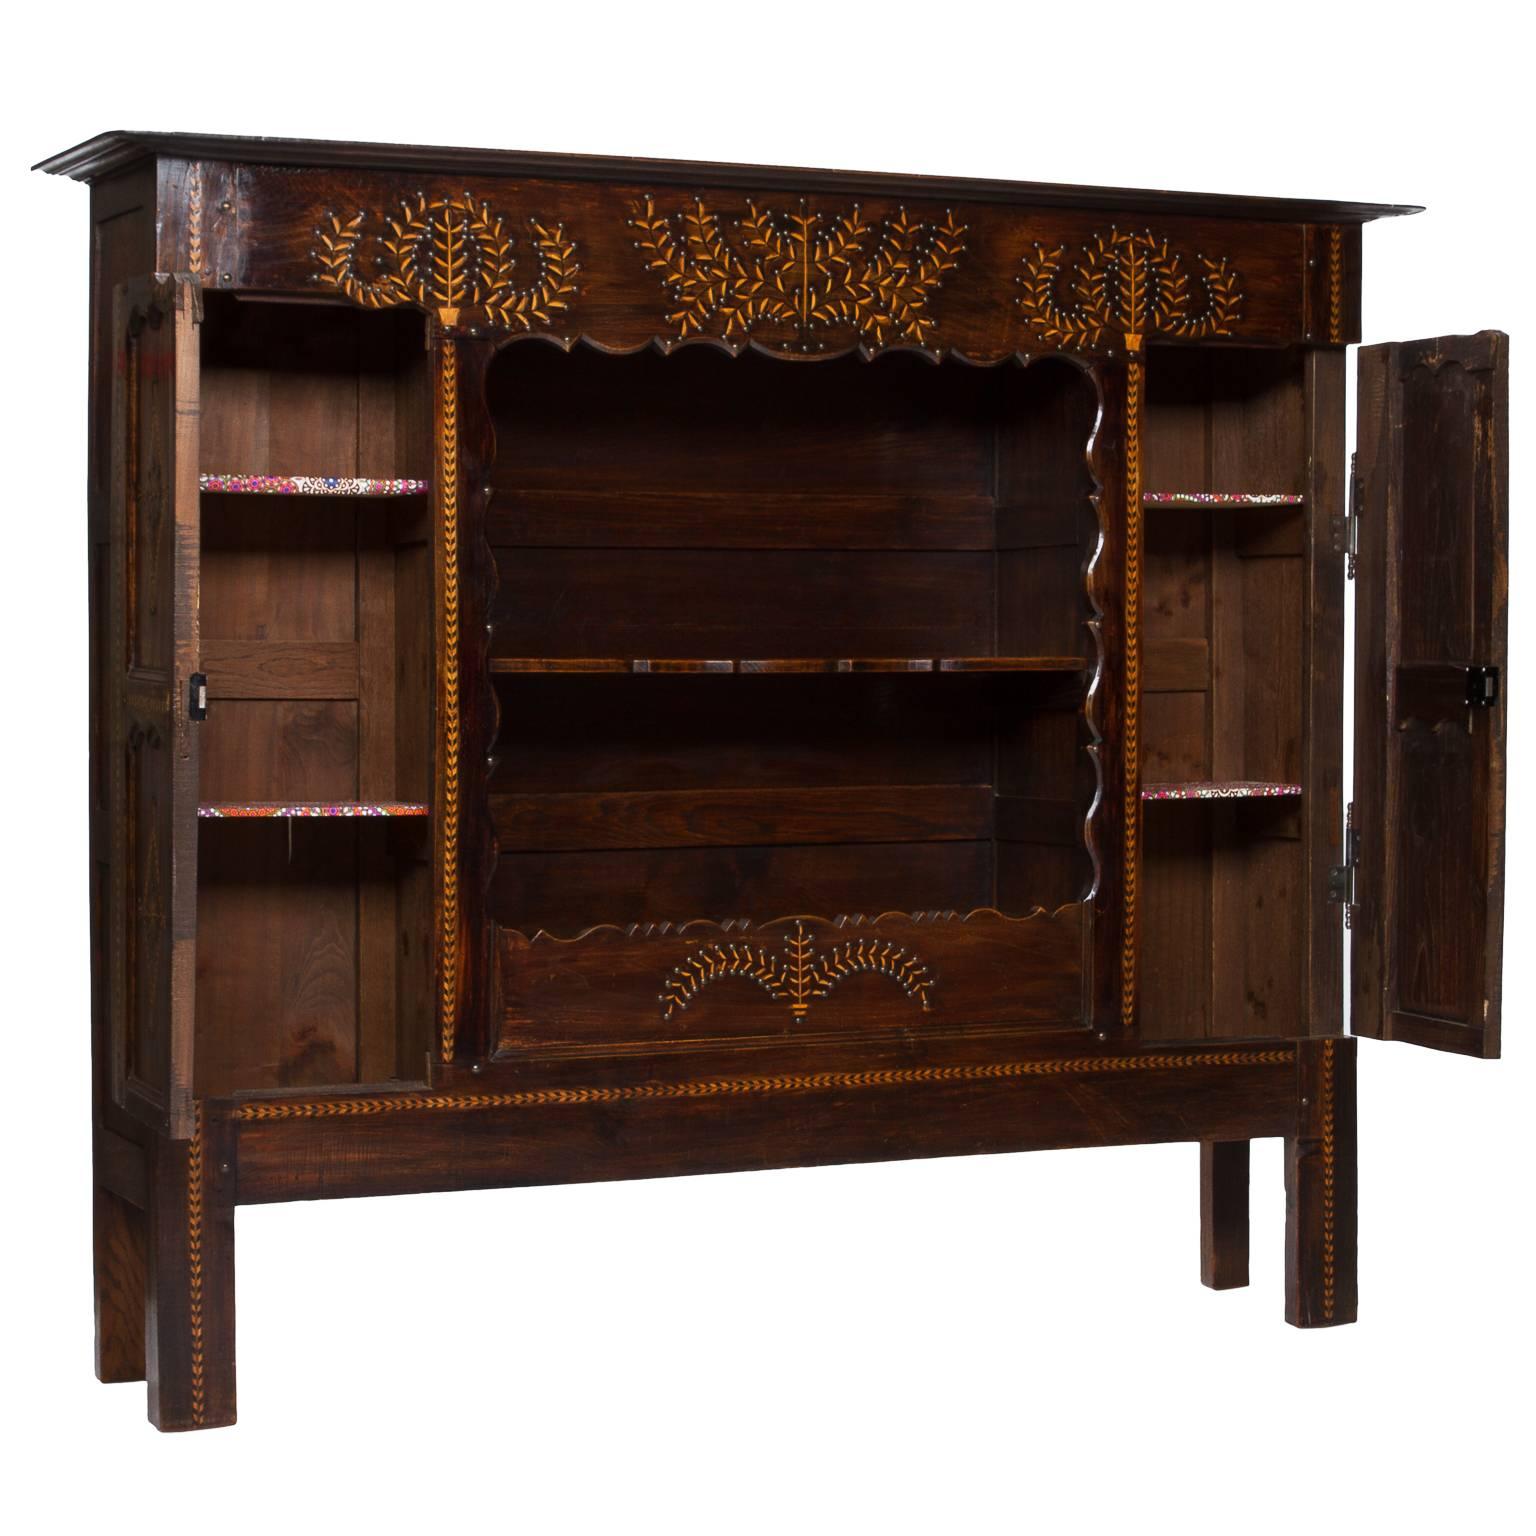 A very unique piece in the style of French Provincial which is heavily inlaid and highlighted with aged brass tacks. Originally a bed front it was converted long ago to a beautiful bookcase. Featuring two ample locking side cabinets, metal hinges,